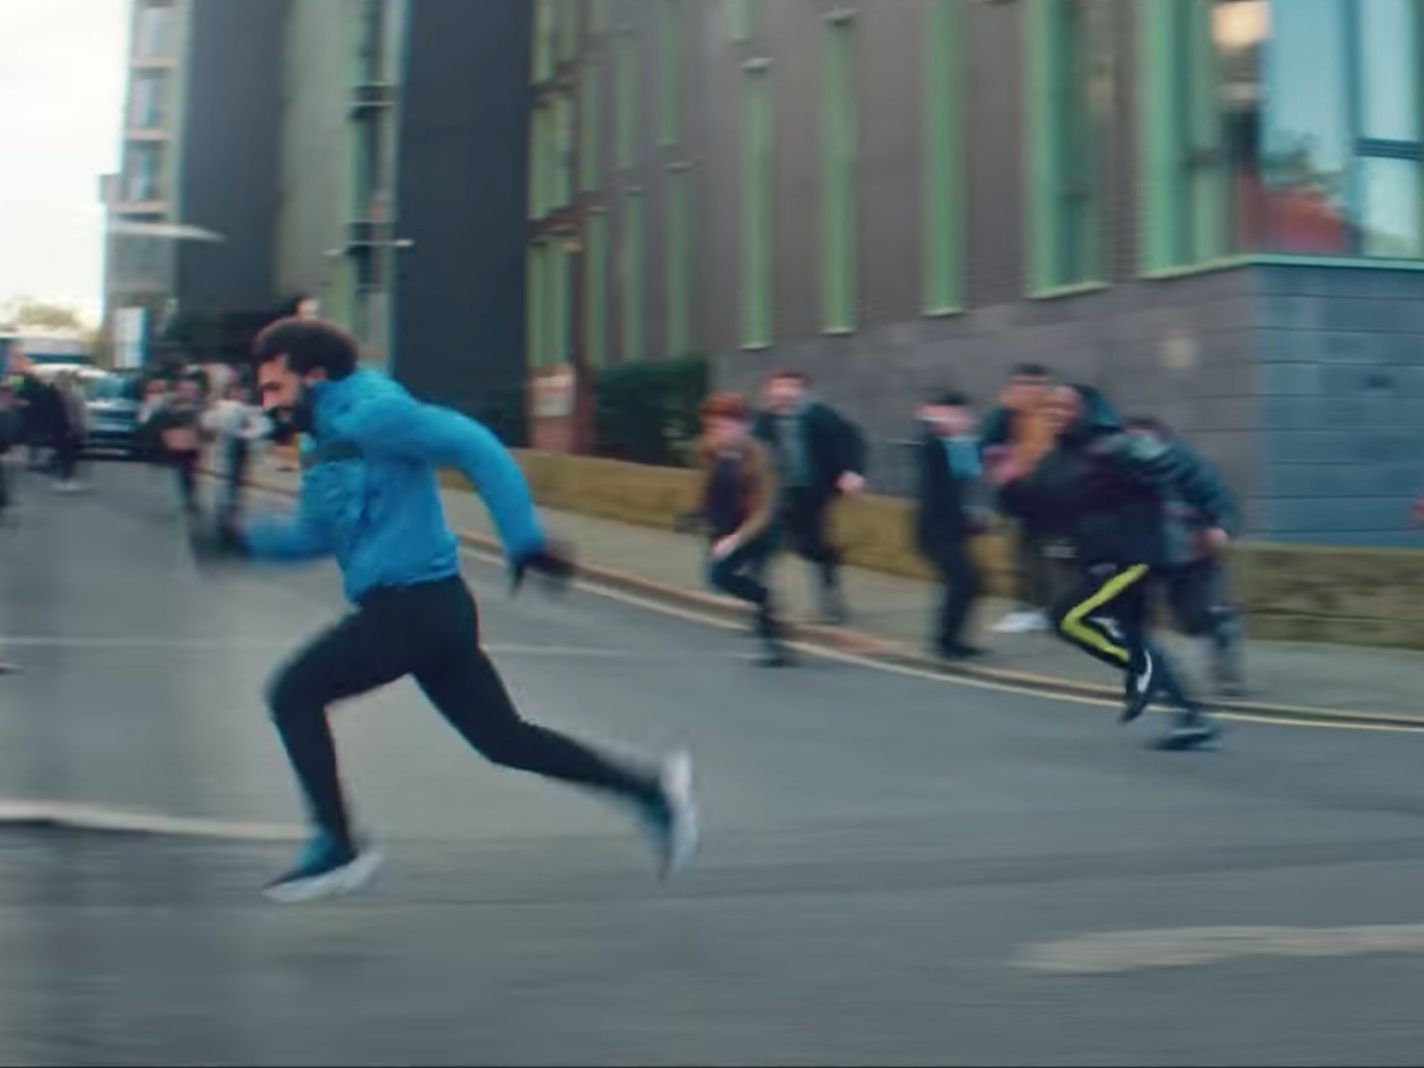 New Pepsi ad featuring Mohamed Salah appears to pay homage to Forrest Gump